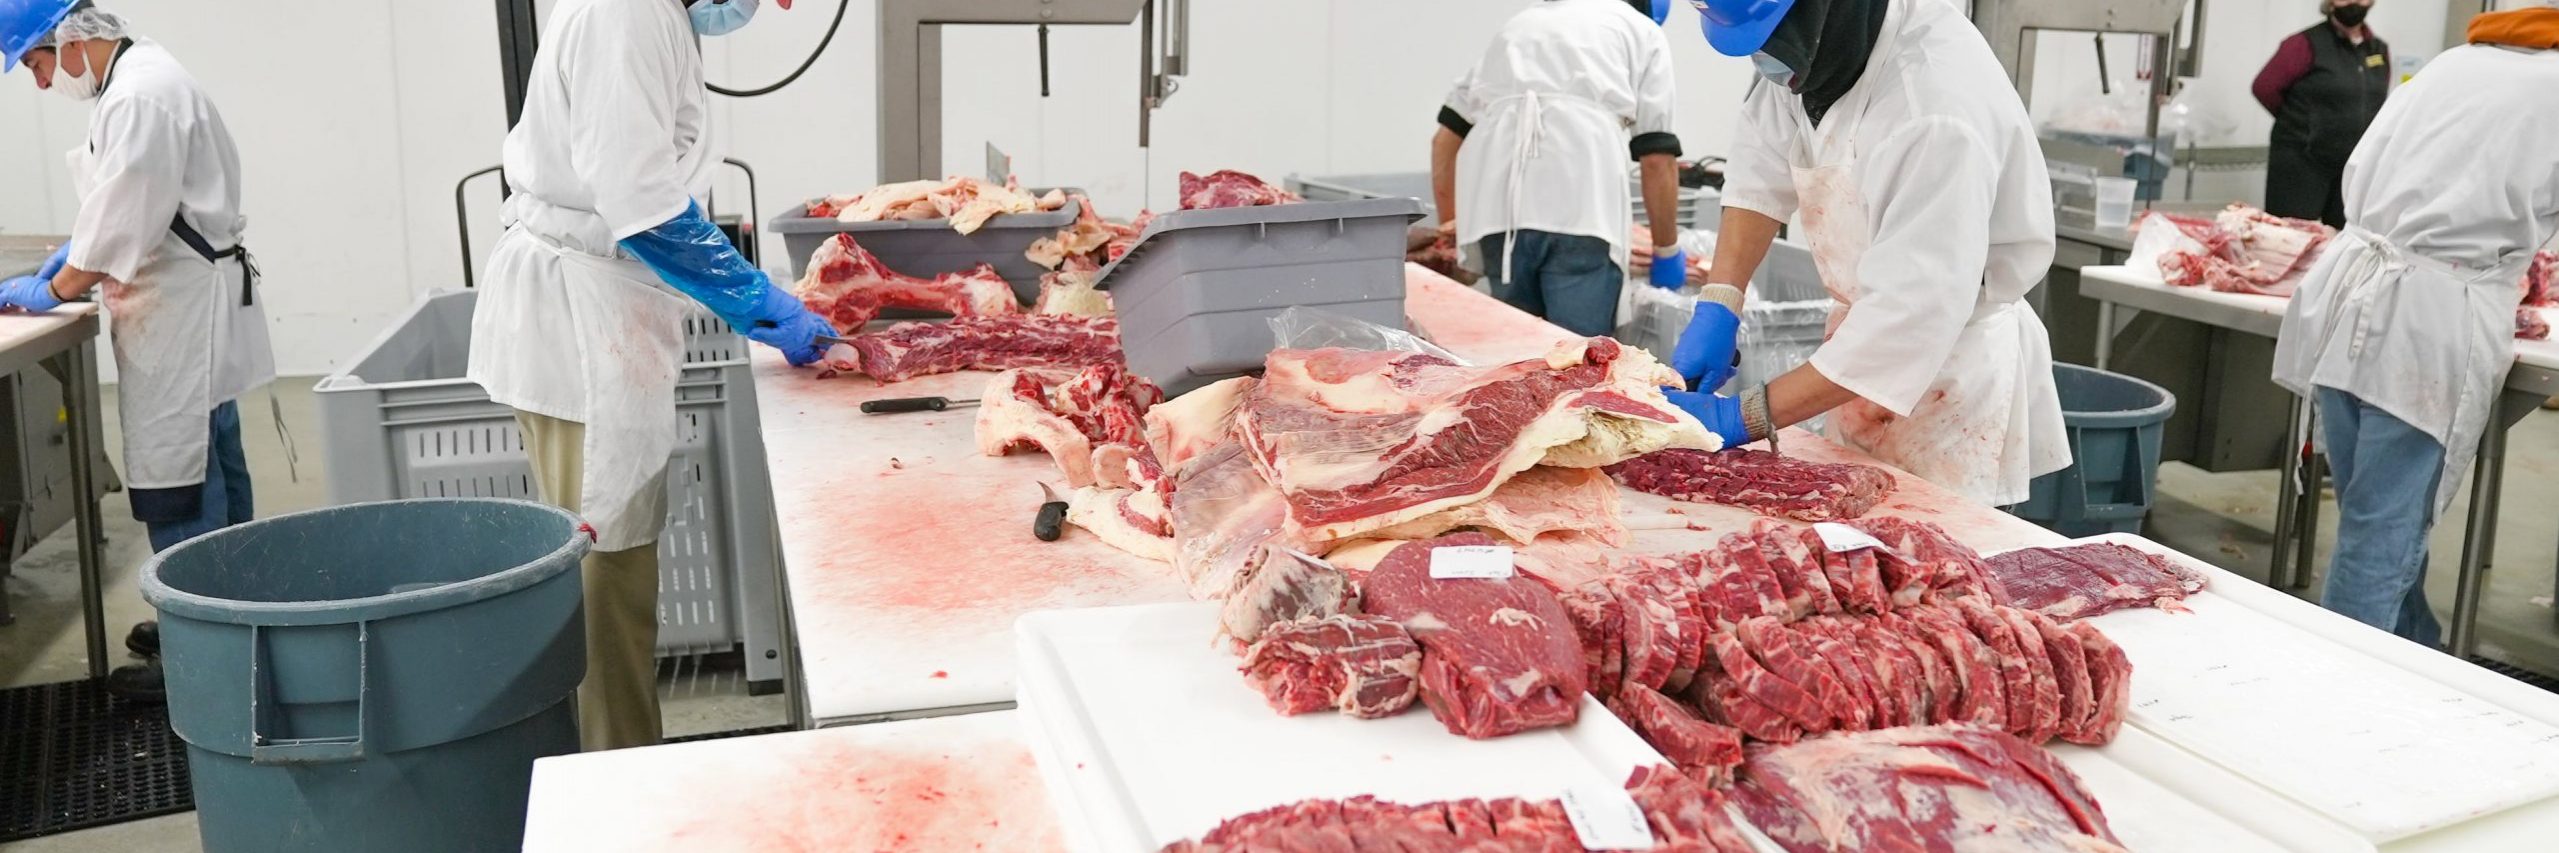 Operations of a meat processing plant